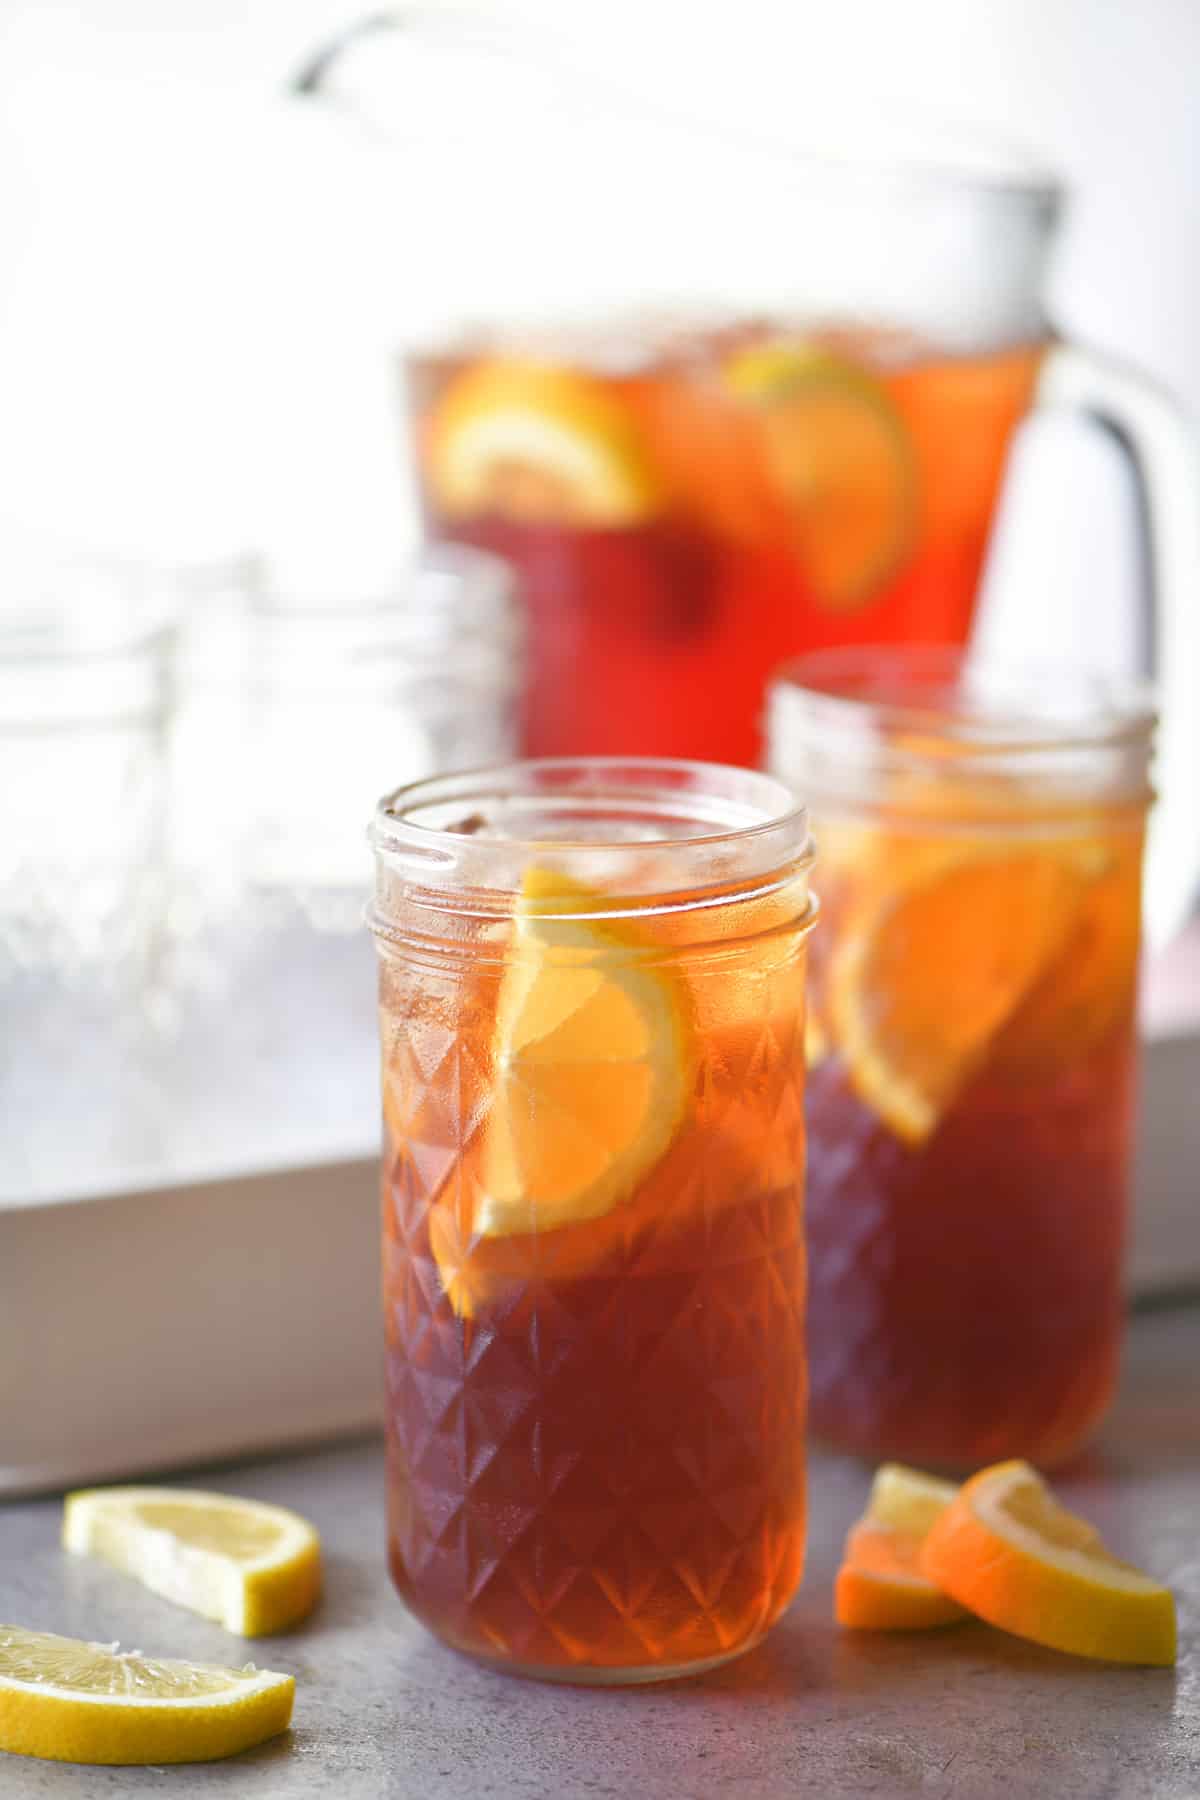 How to Make a Single Serving of Sweet Tea